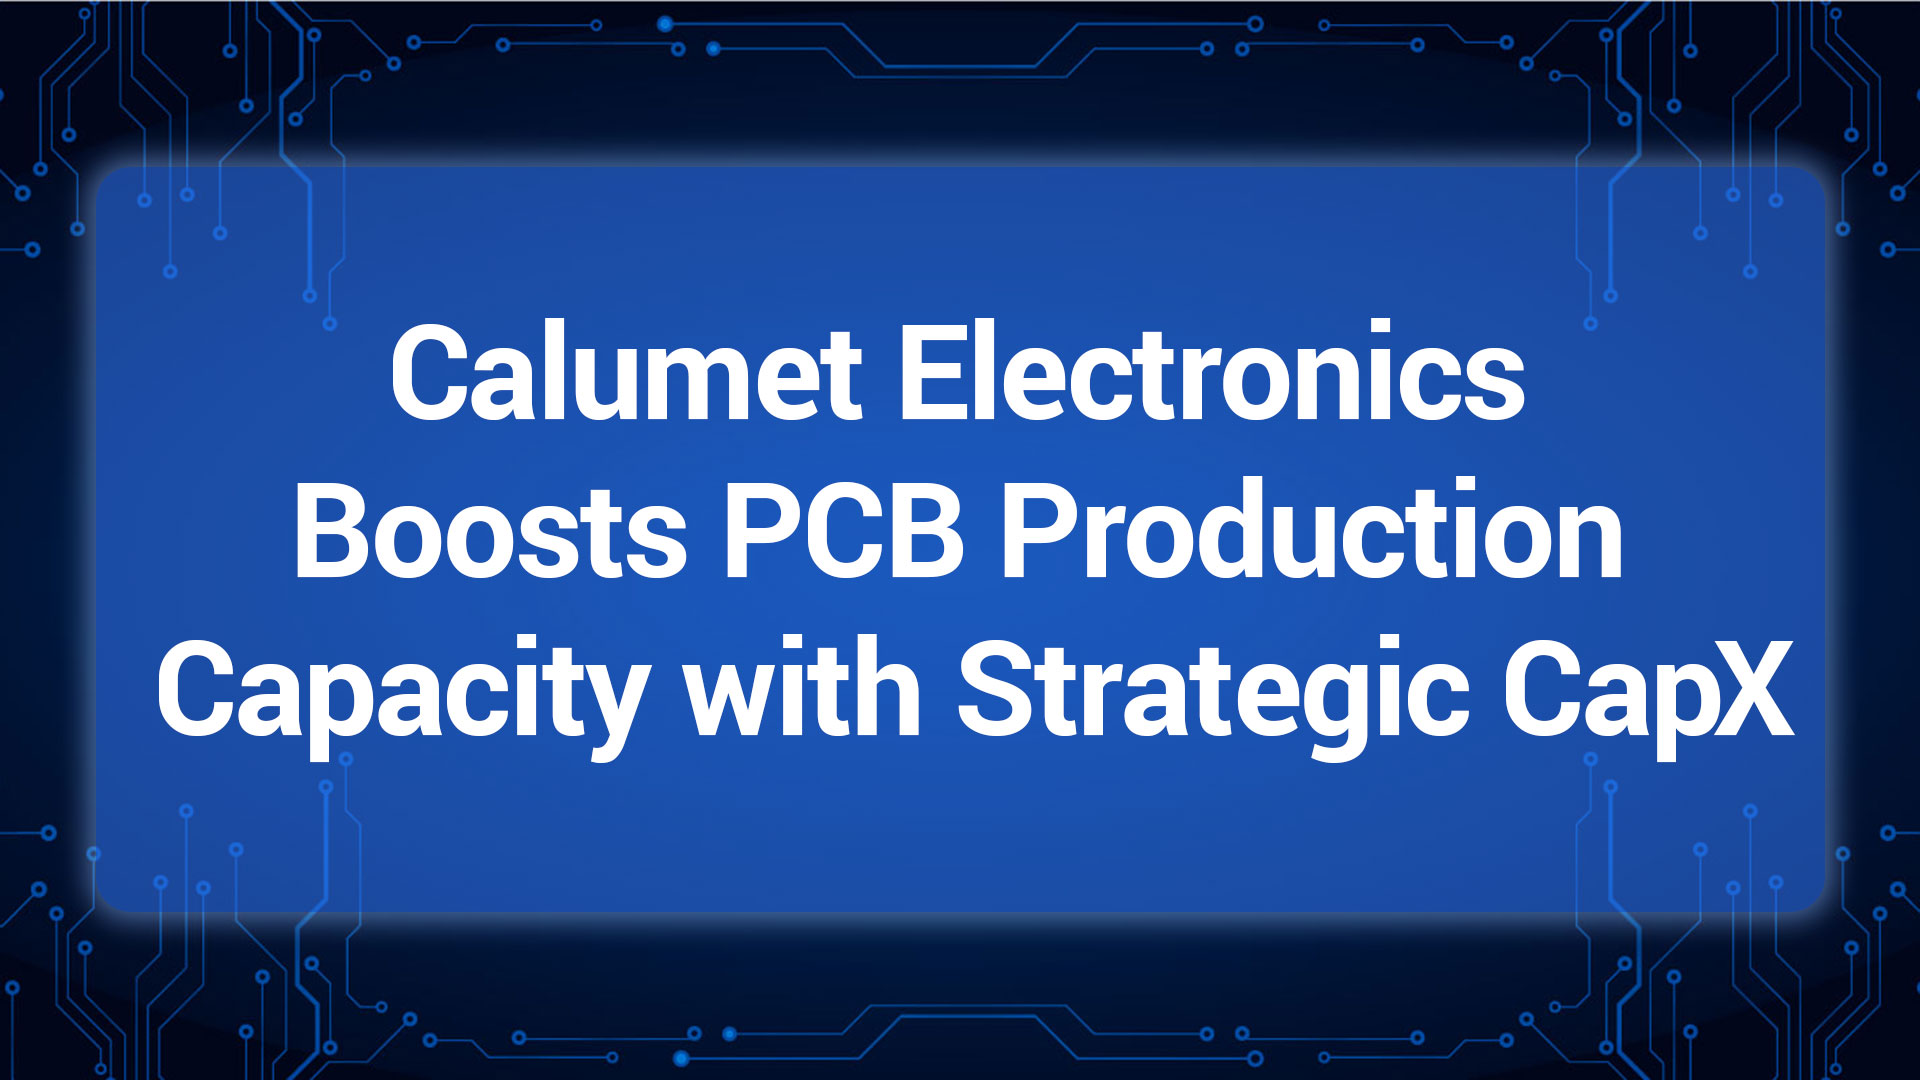 Calumet ELectronics boosts PCB production capacity with Strategic CapX